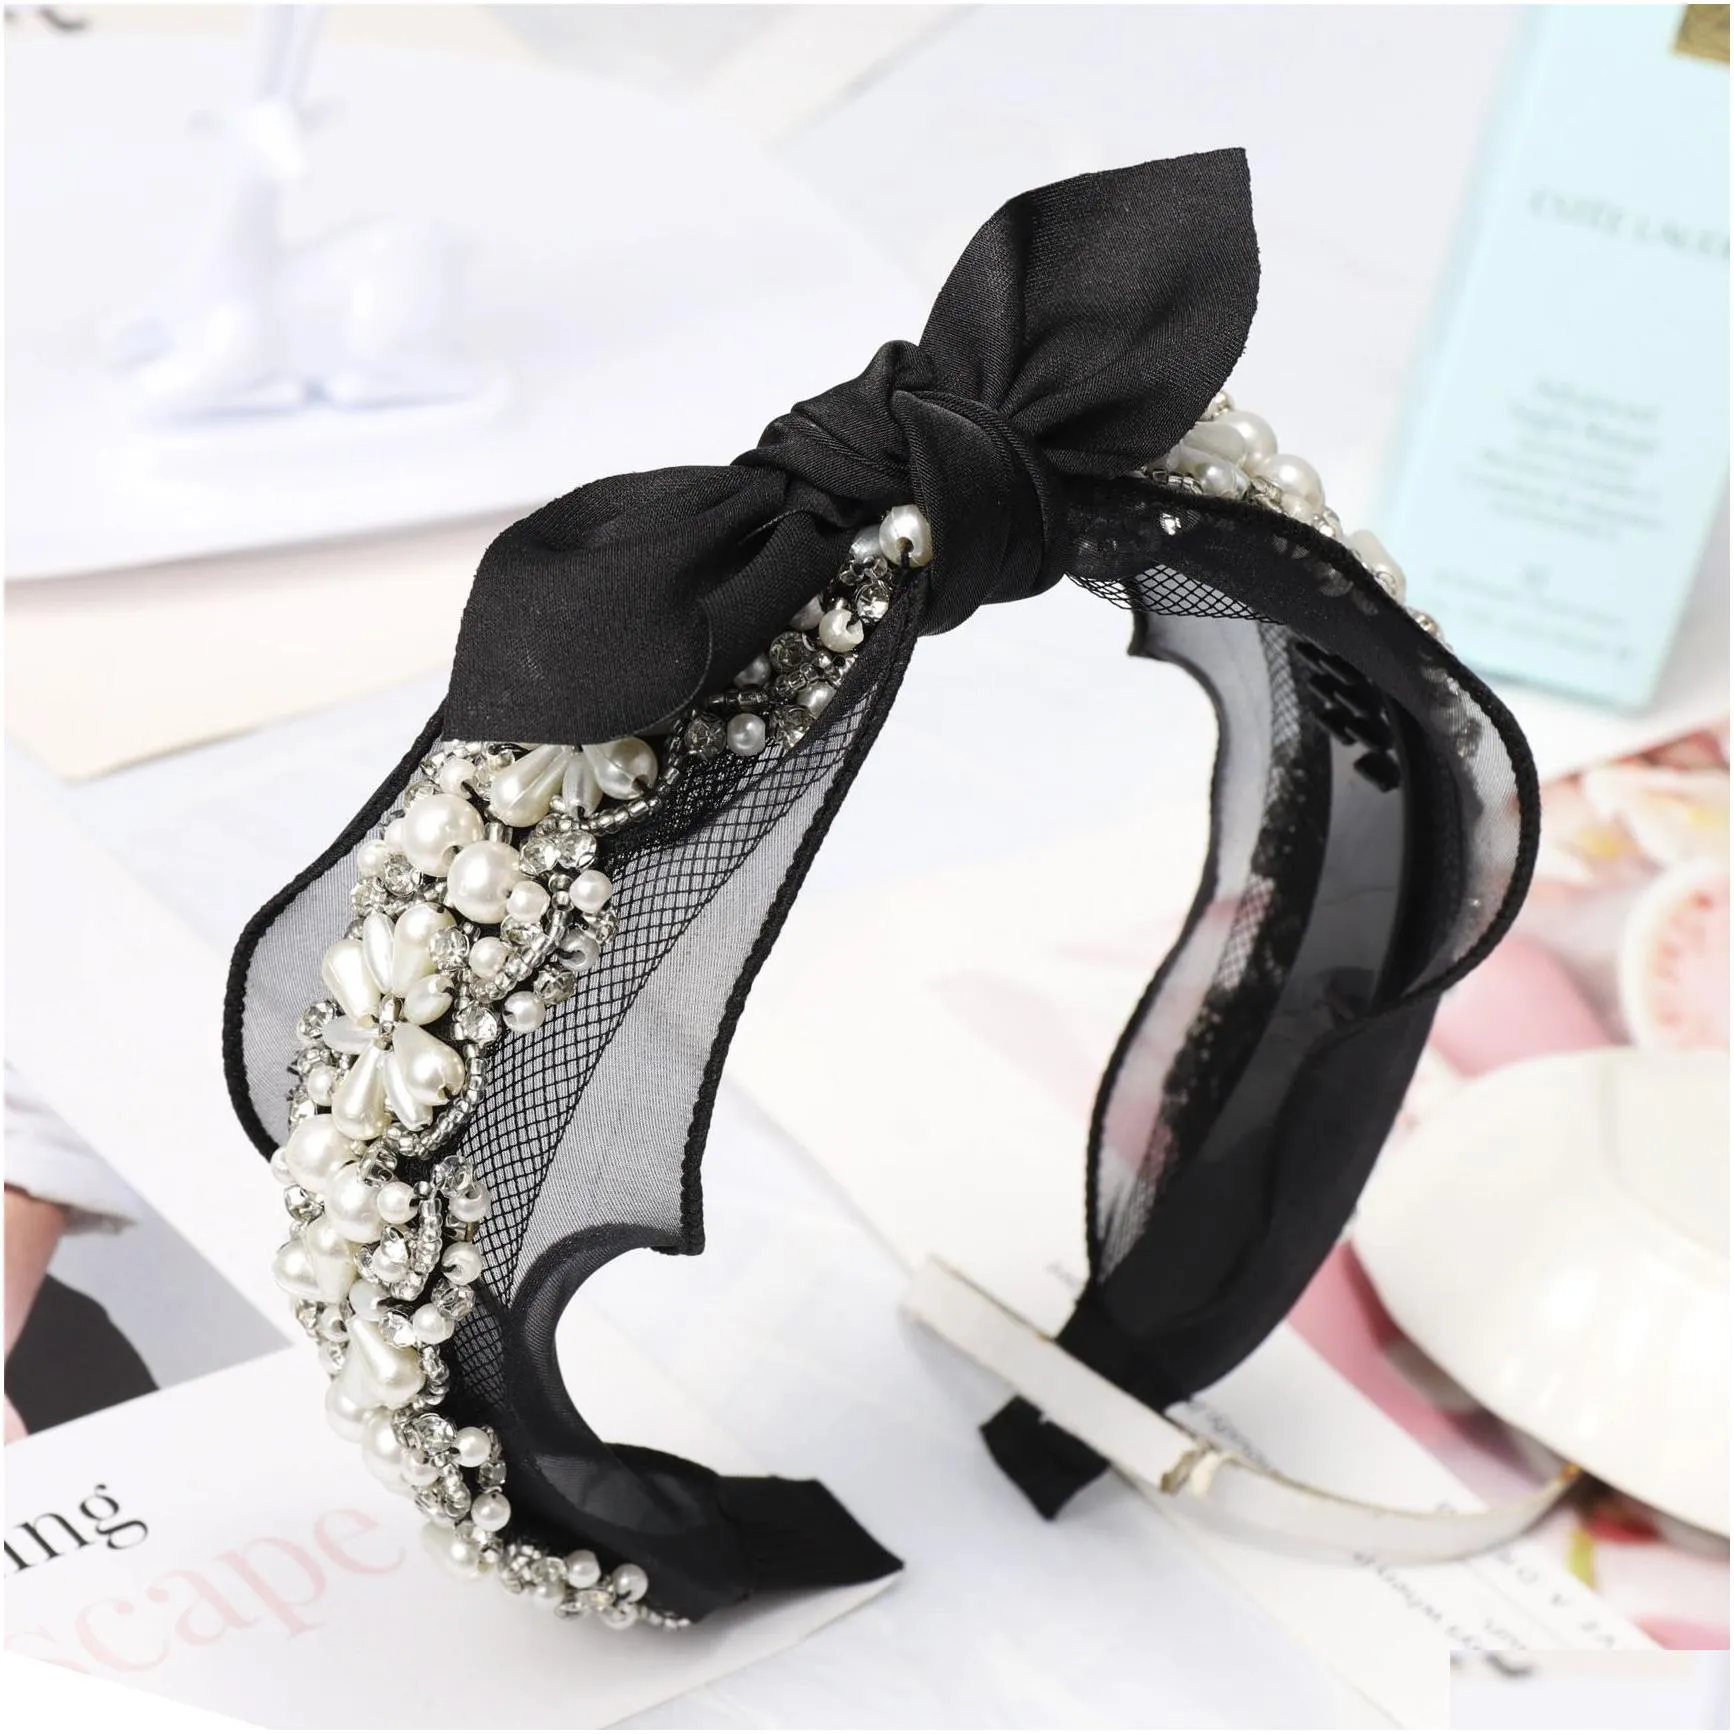 Lace Headband Diamond Pearl Rhinestone Hair Accessories Black Butterfly Boutique Bow Hair Bands For Women Knot Haar Accessoires1538105